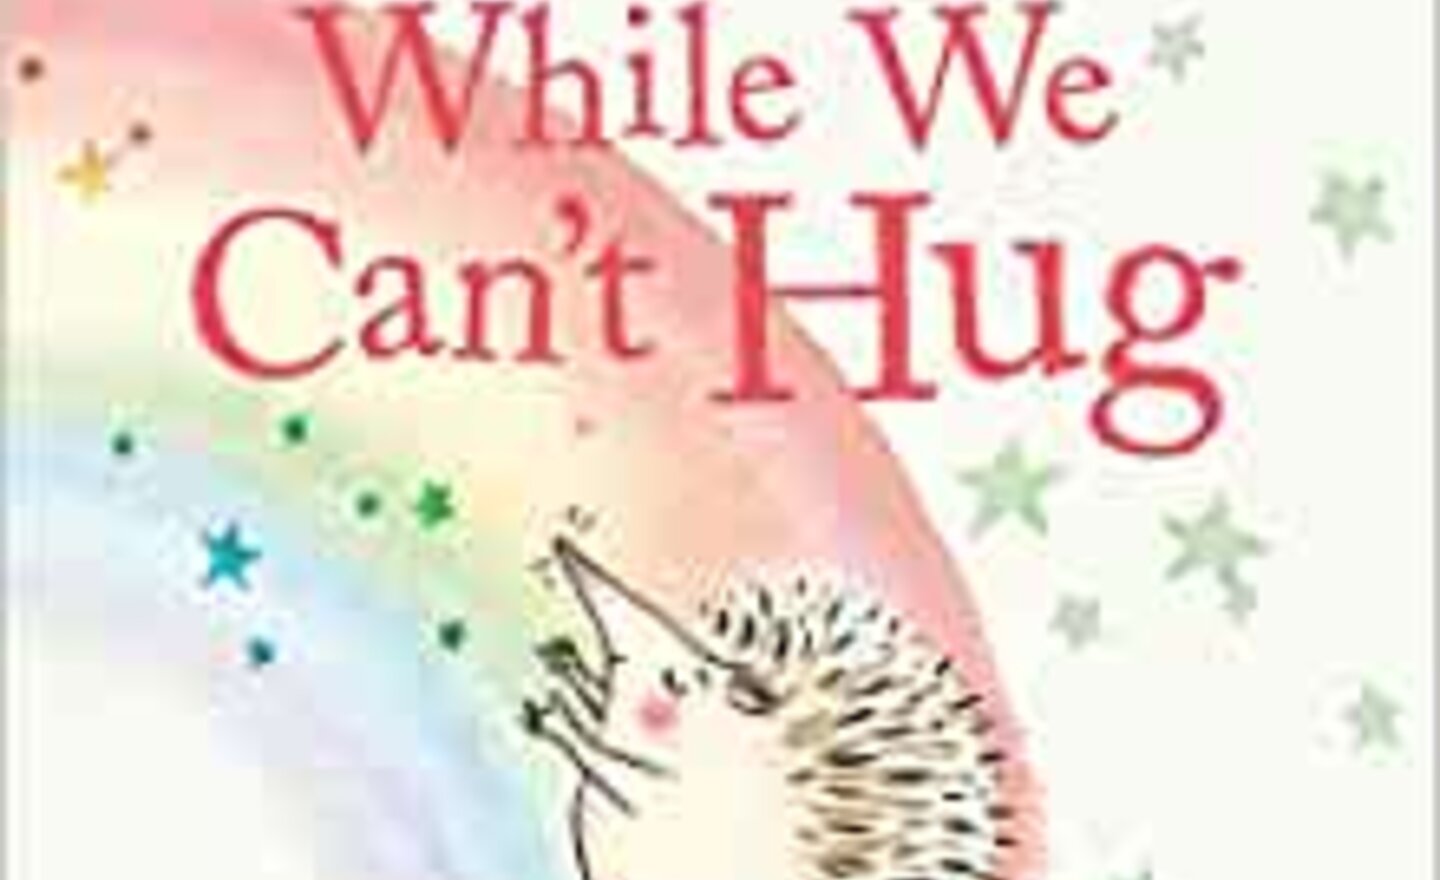 Image of While we can't hug...